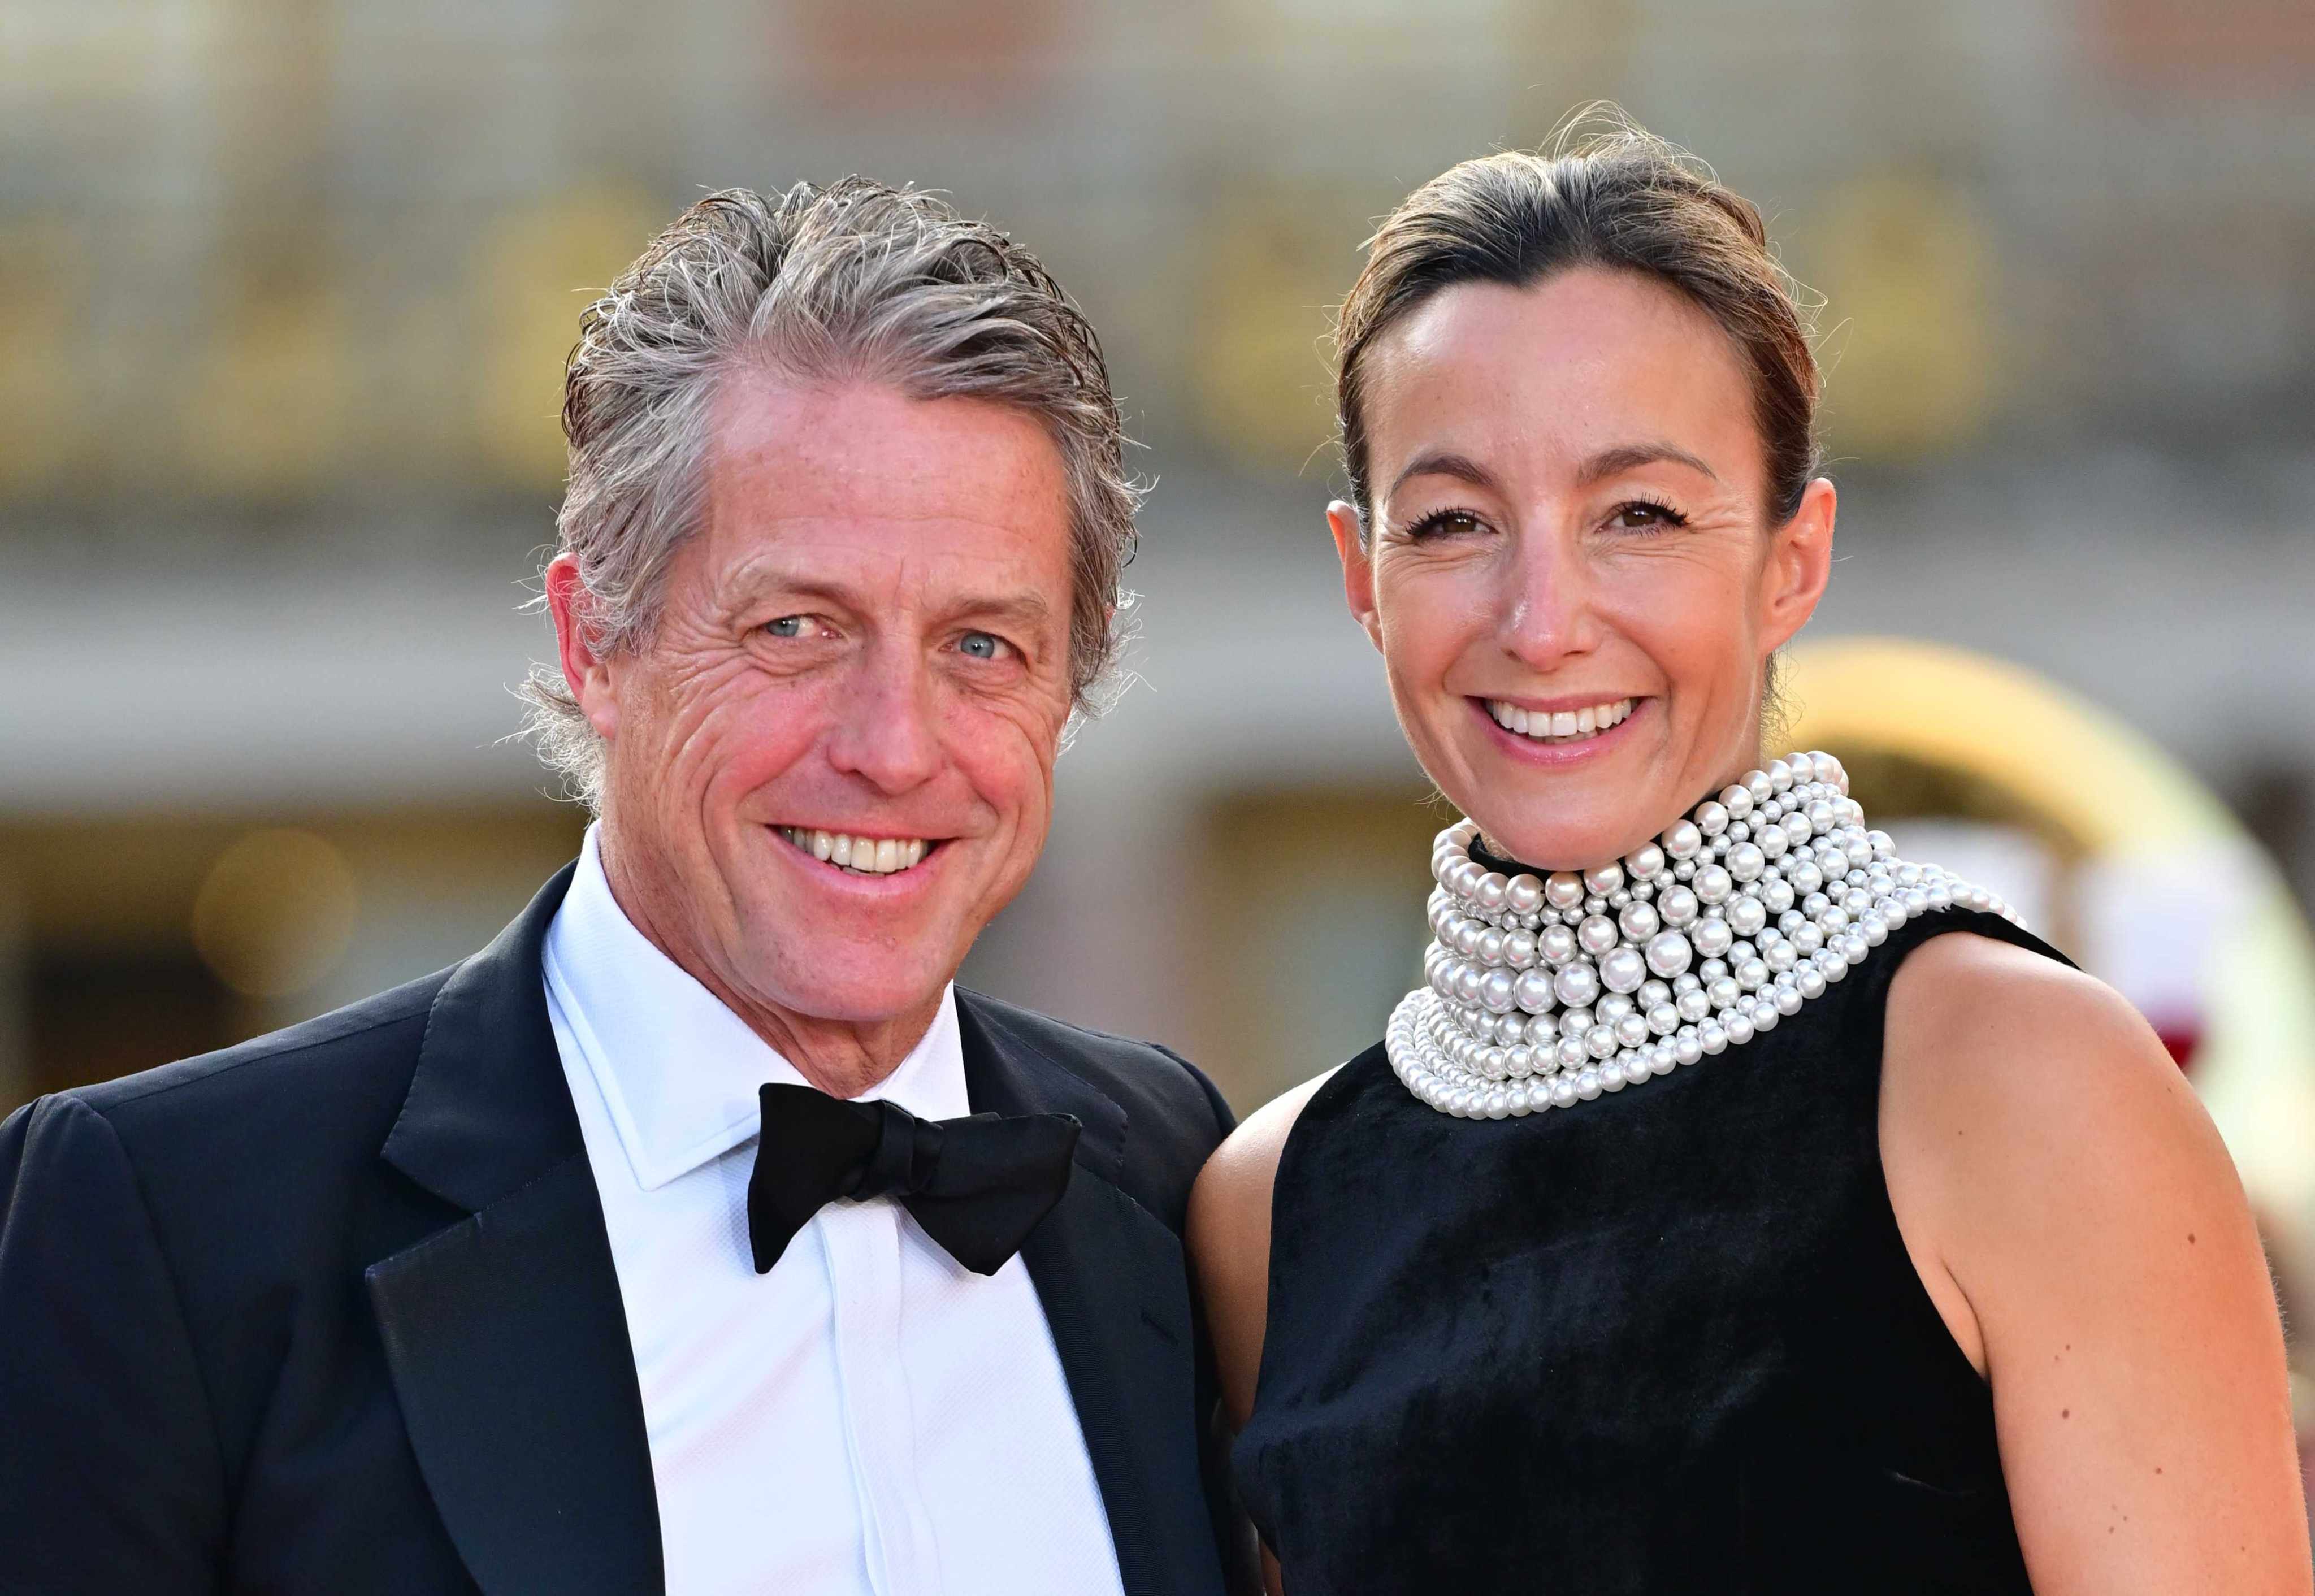 Hugh Grant and Anna Elisabet Eberstein attended a state dinner for King Charles and Queen Camilla at the Palace of Versailles in France. Photo: Getty Images